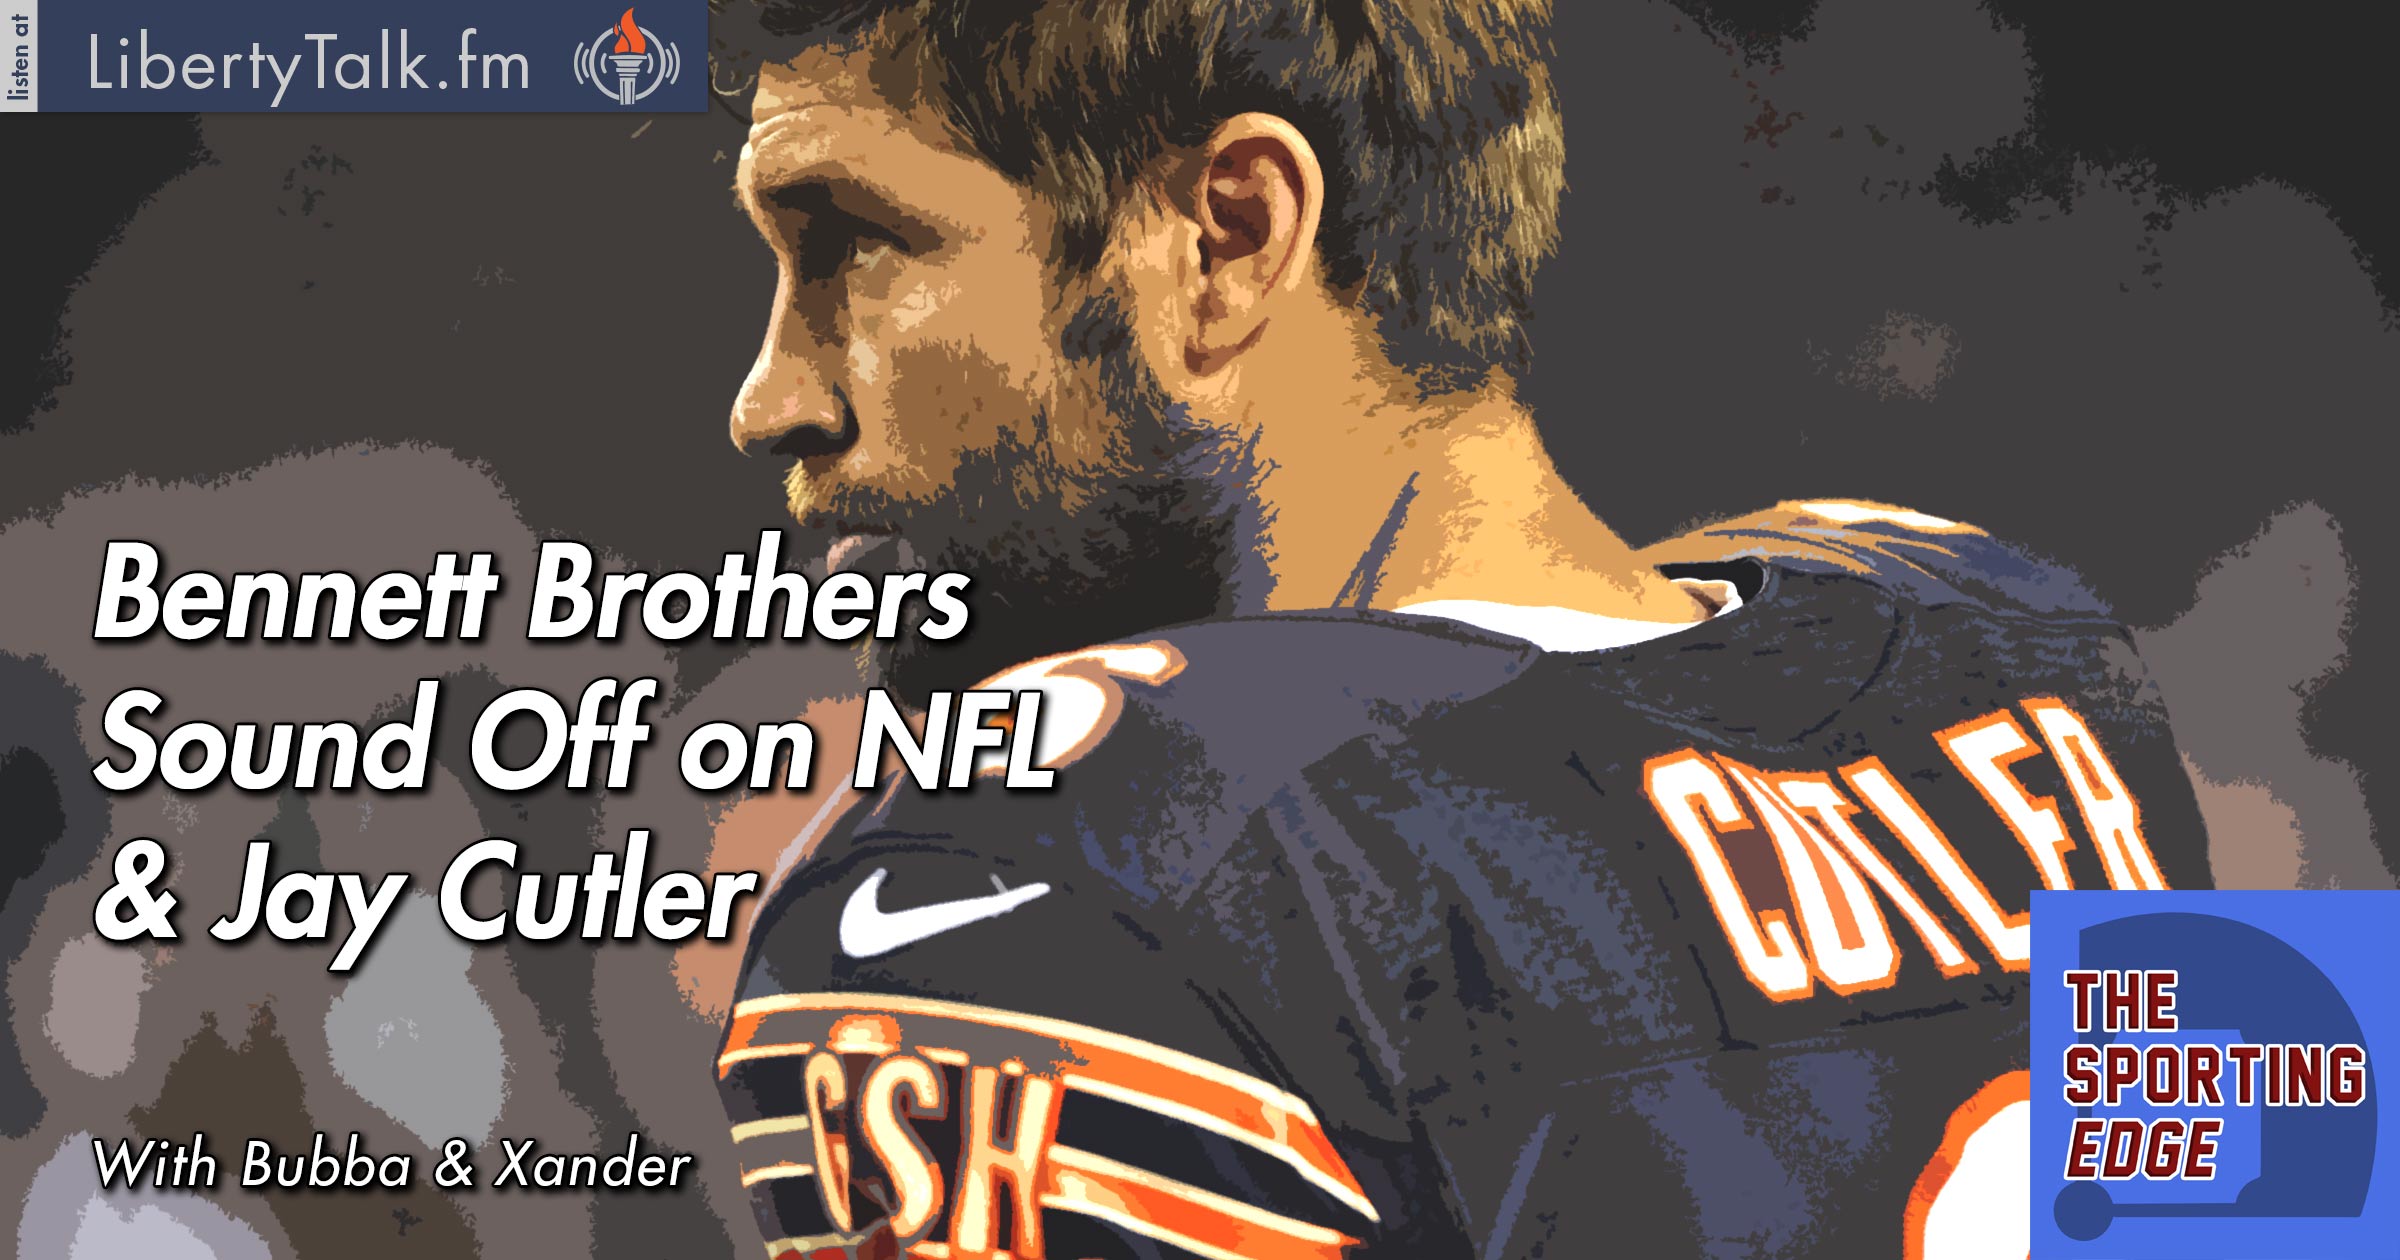 Bennett Brothers Sound Off on NFL and Jay Cutler - The Sporting Edge